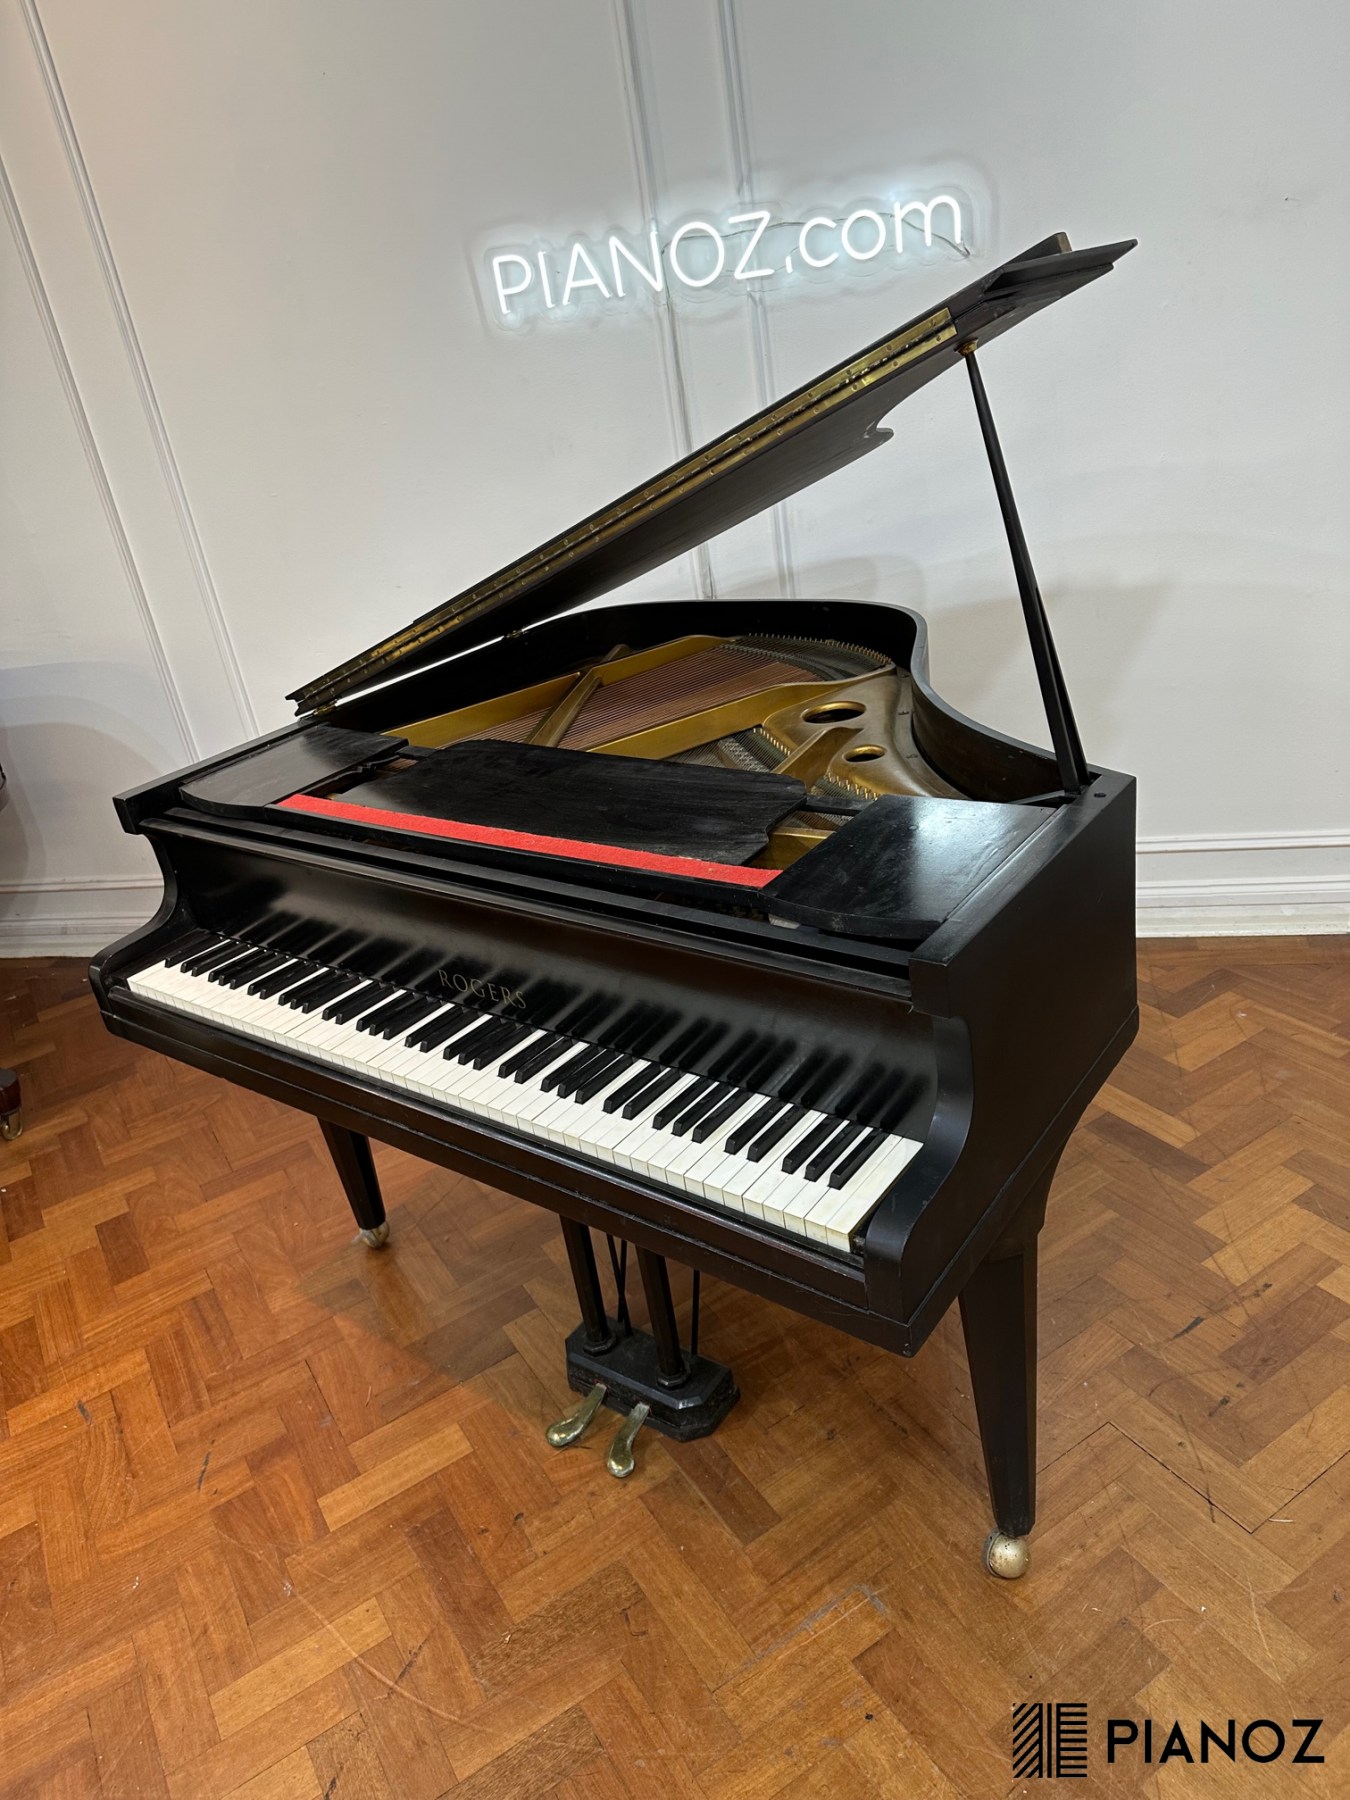 Rogers Black Satin Baby Grand Piano piano for sale in UK